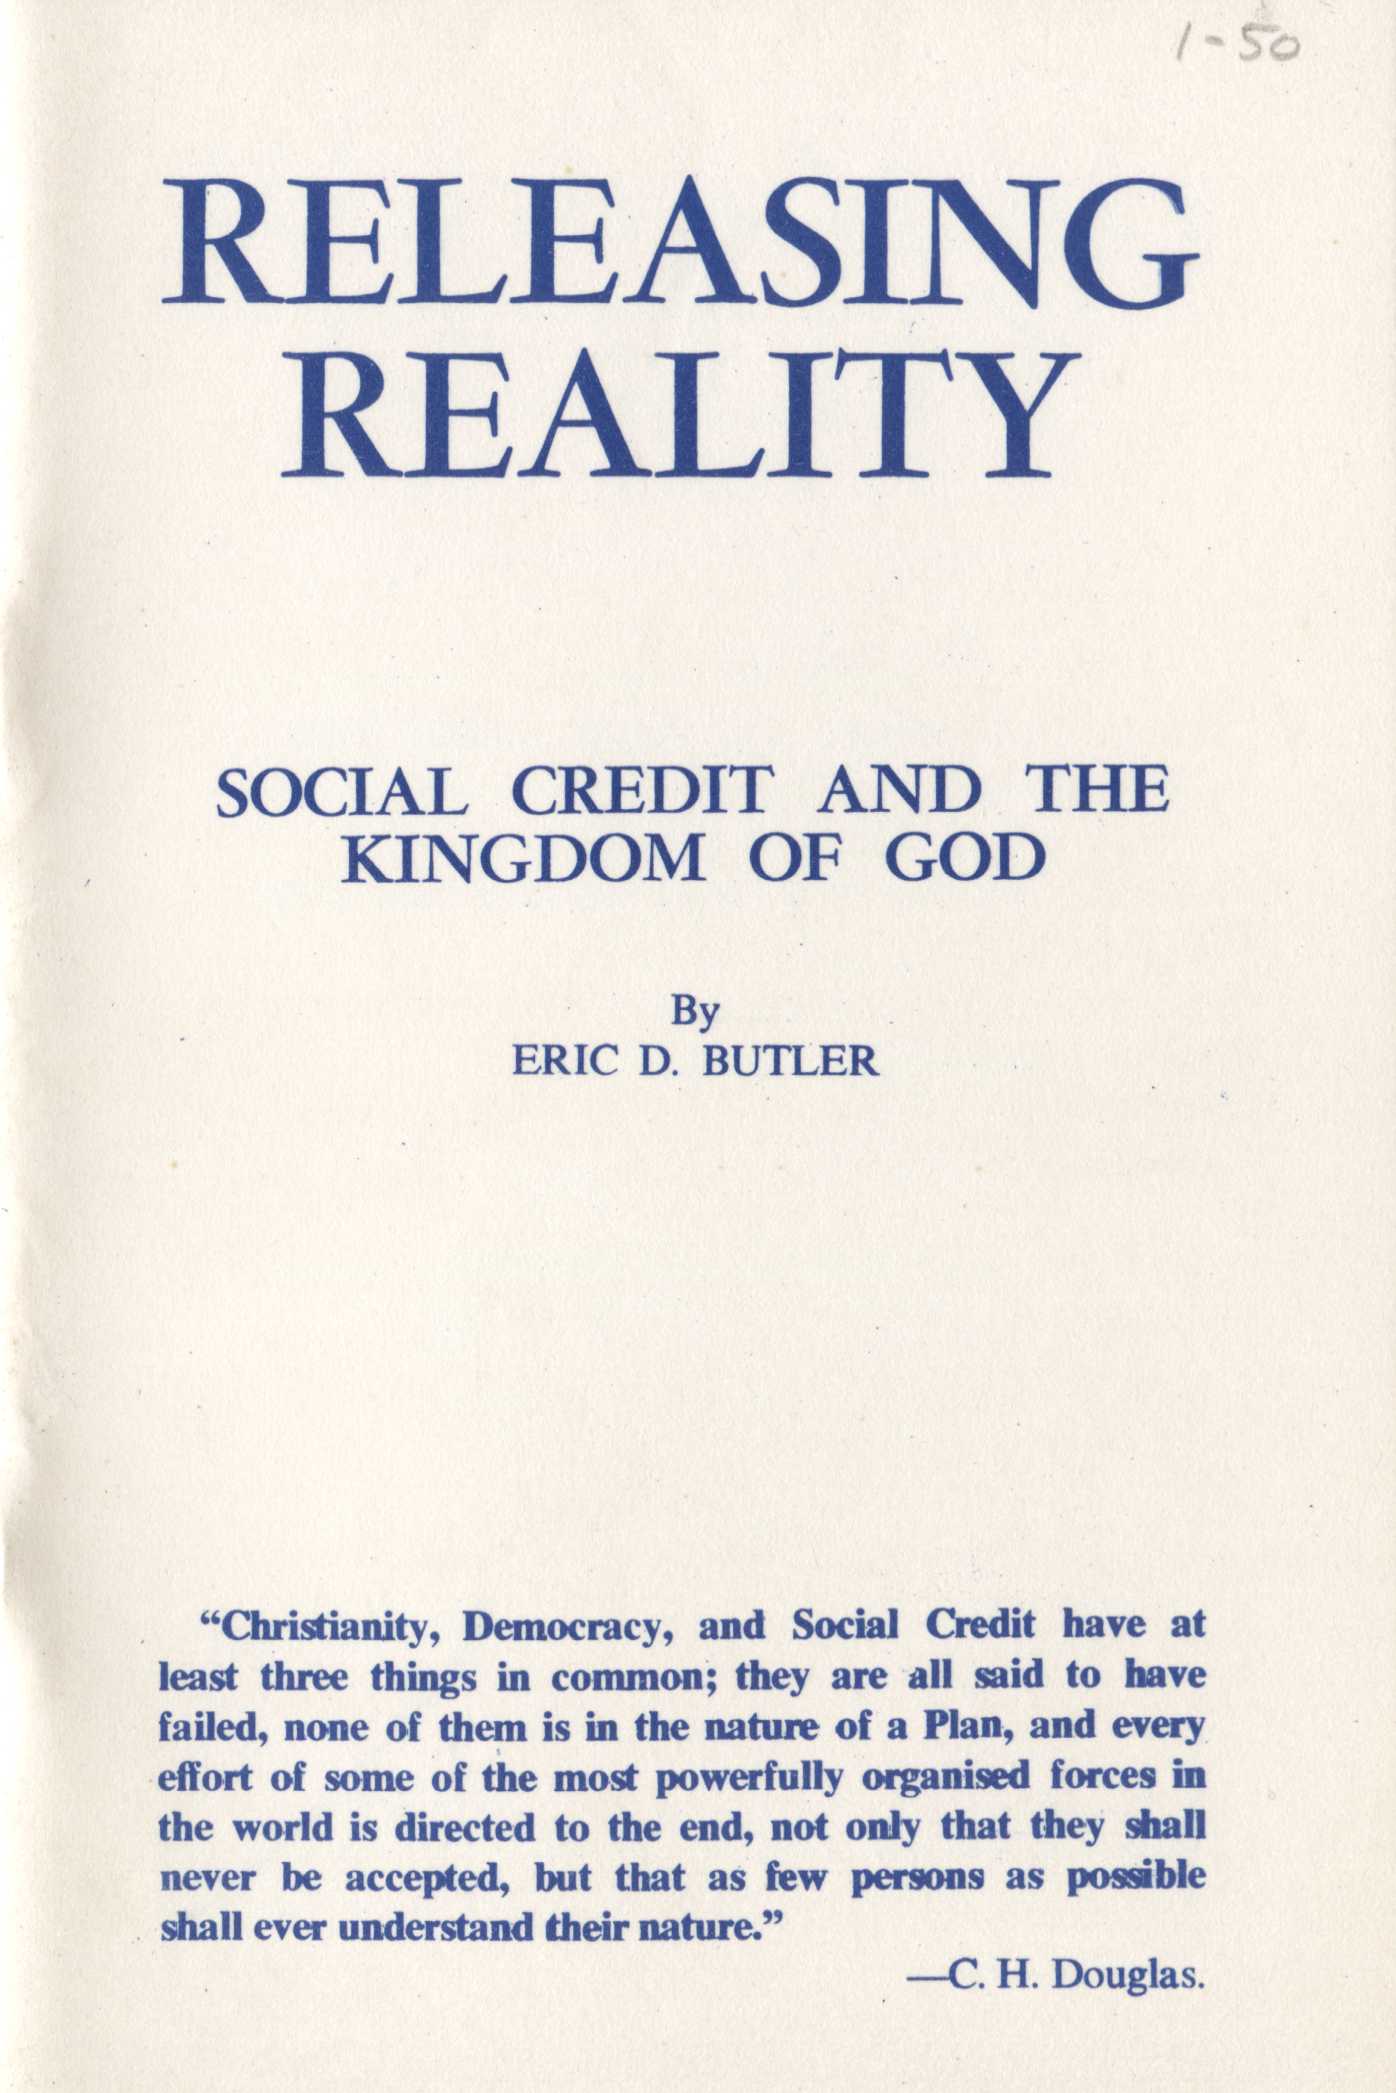 Releasing Reality Booklet By Eric D. Butler